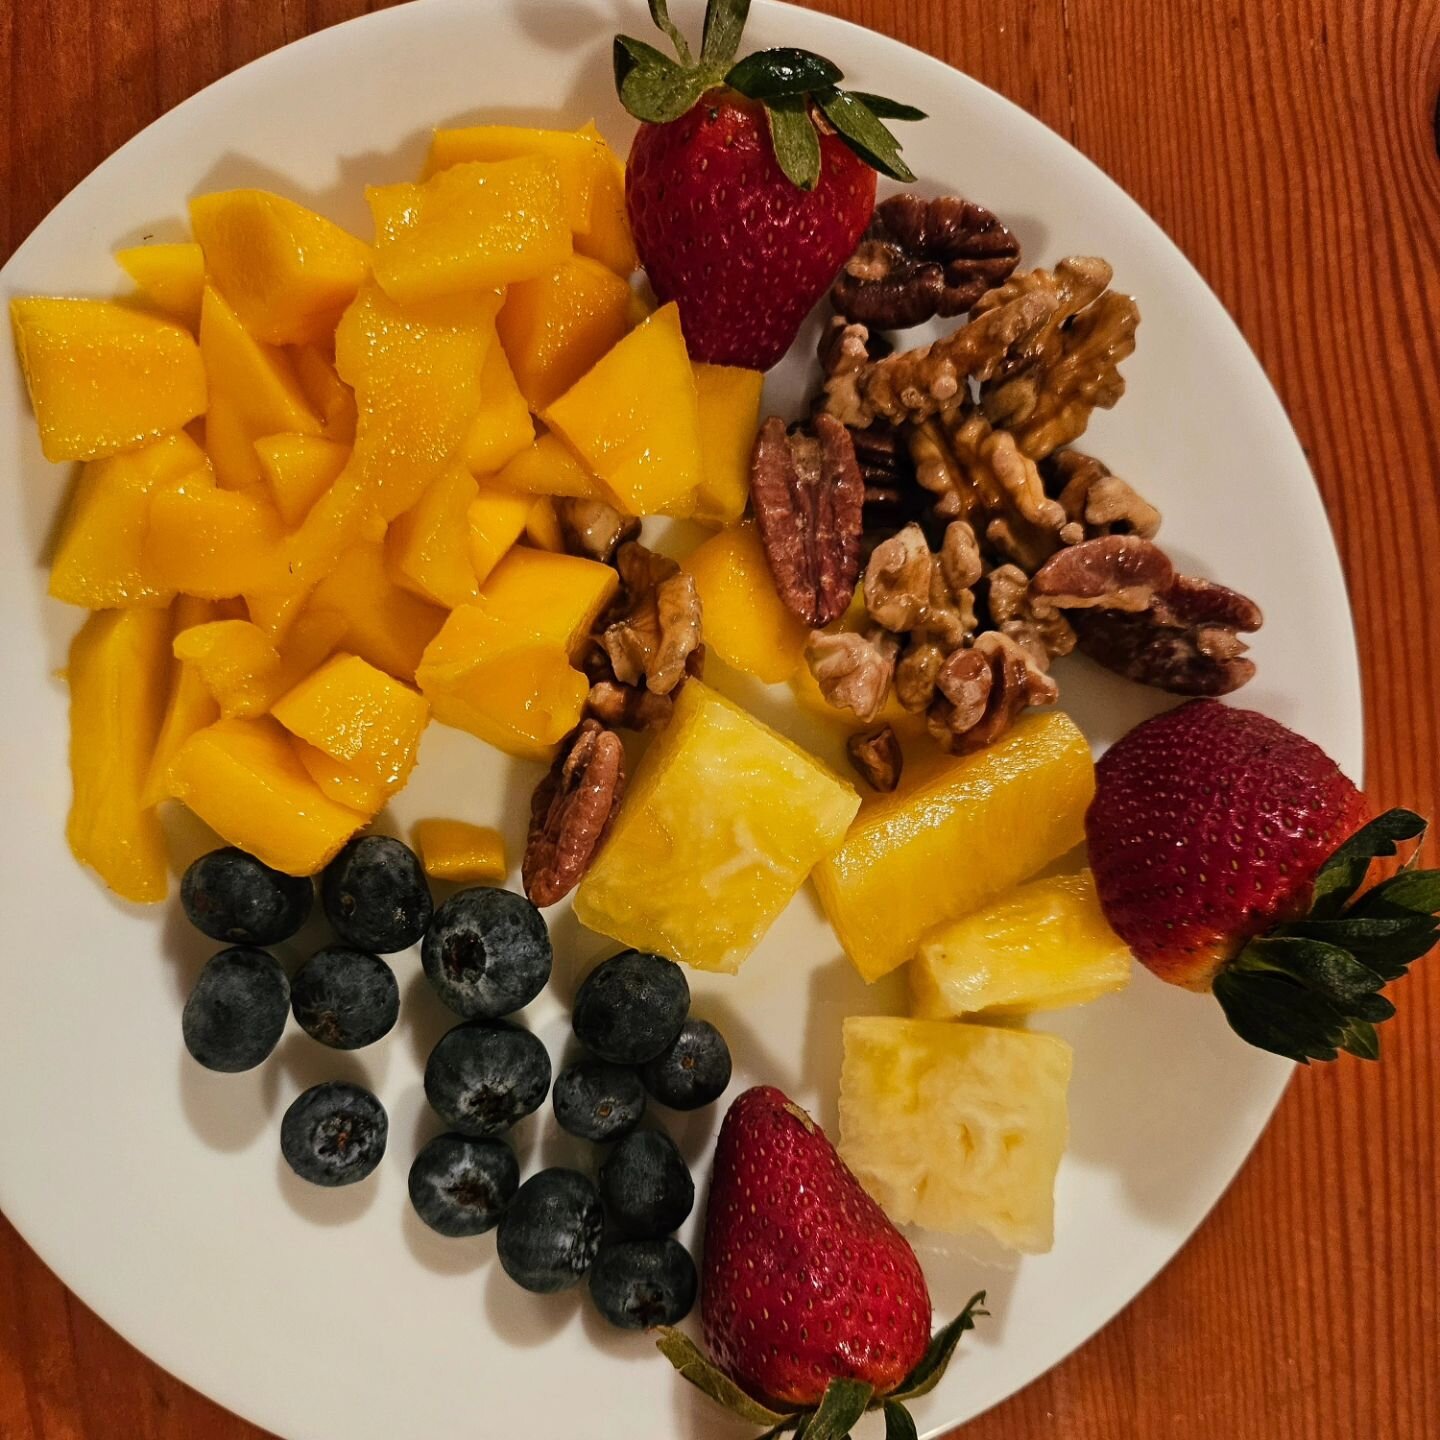 The breakfast of champions. Local blueberries, strawberries, pineapple, and mango with soaked walnuts and pecans.